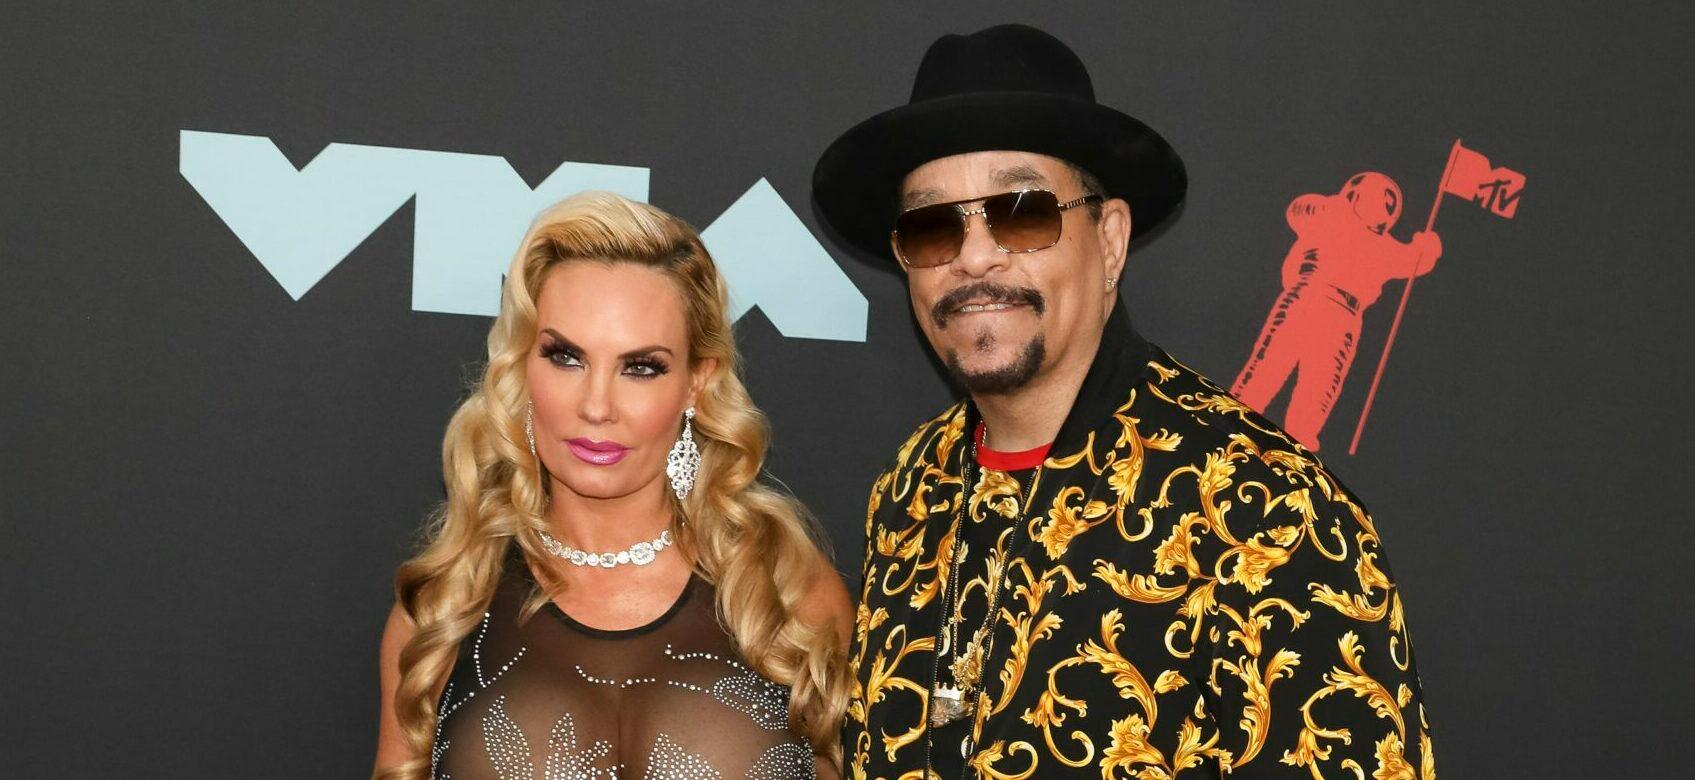 Ice-T Proudly Brags About ‘White Dude’ Checking Out Wife Coco Austin At Grammys